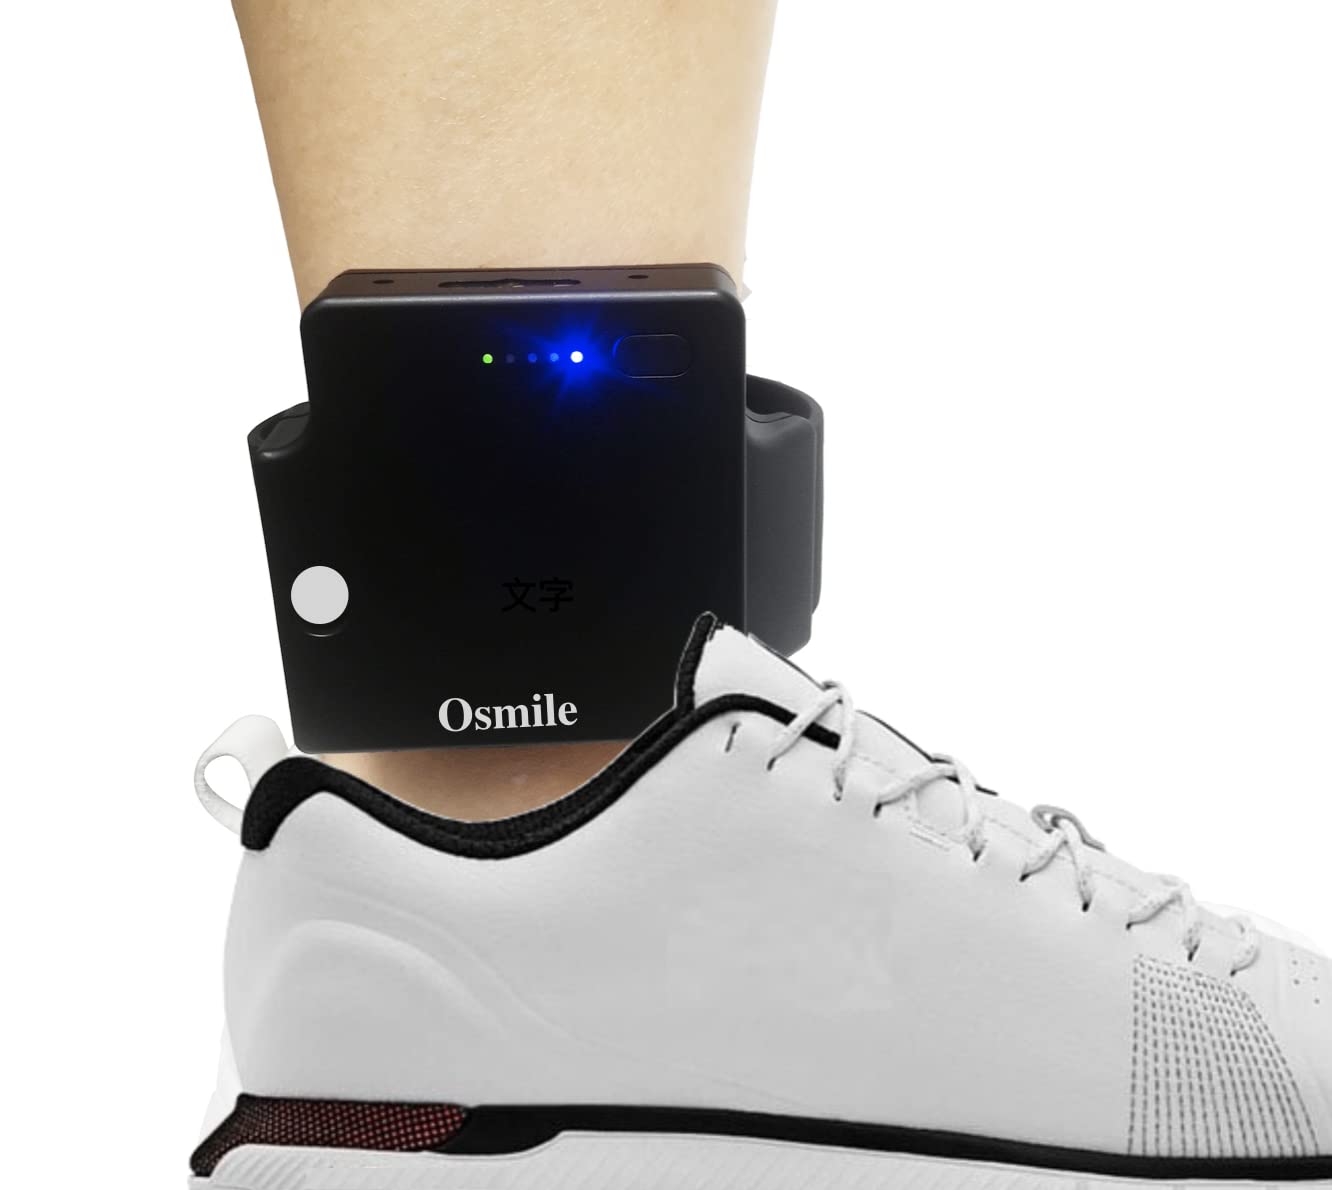 Osmile ANK1000 Ankle GPS Tracker for Prisoner, Psychopathy, Dementia, Alzheimer's Diseases, with Portable Charger